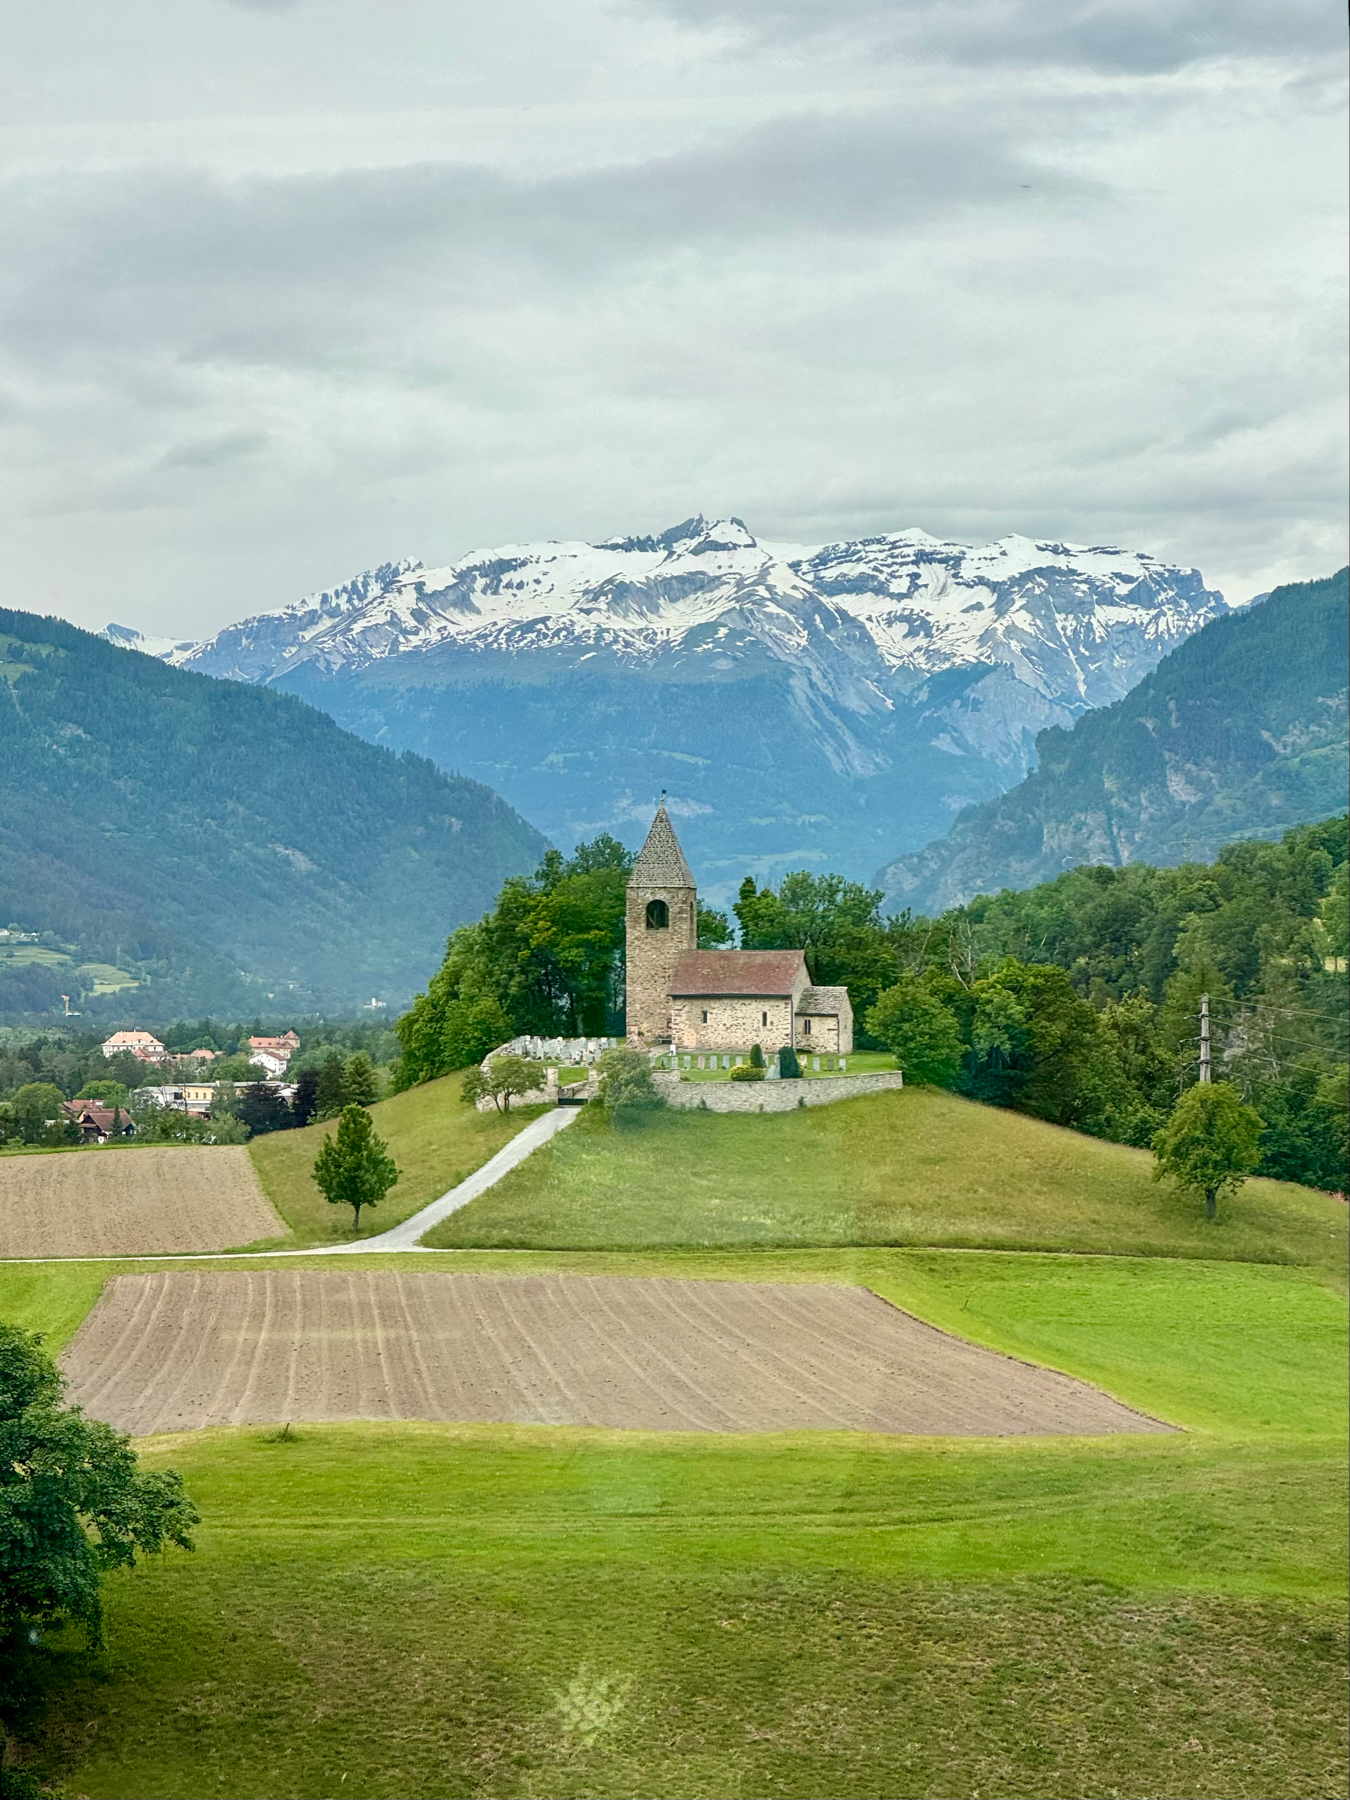 A serene landscape with a small church on a hill, plowed fields in the foreground, and snow-capped mountains in the background.